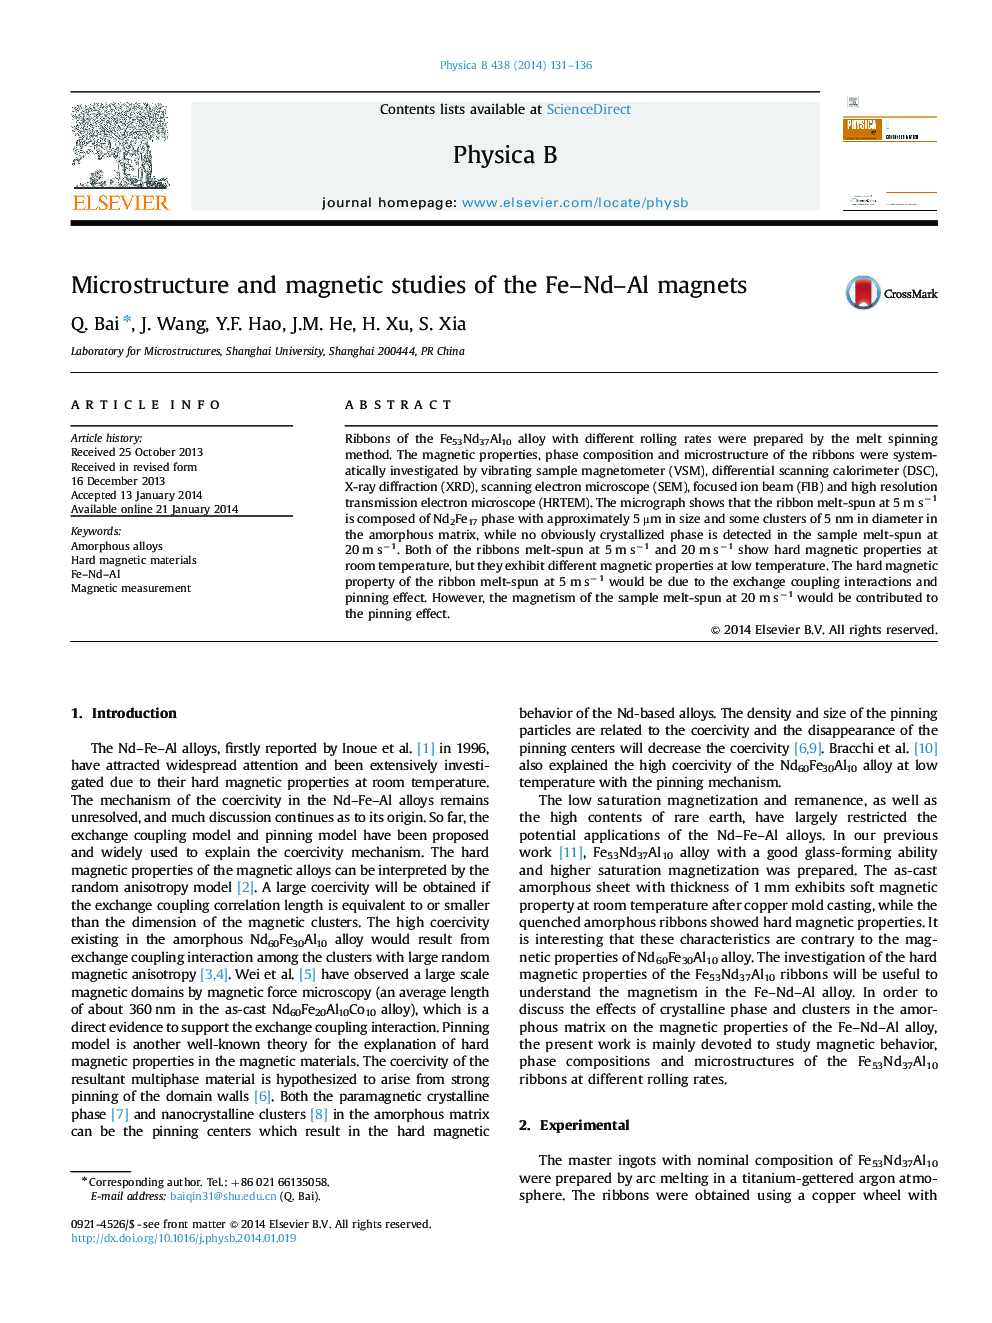 Microstructure and magnetic studies of the Fe–Nd–Al magnets